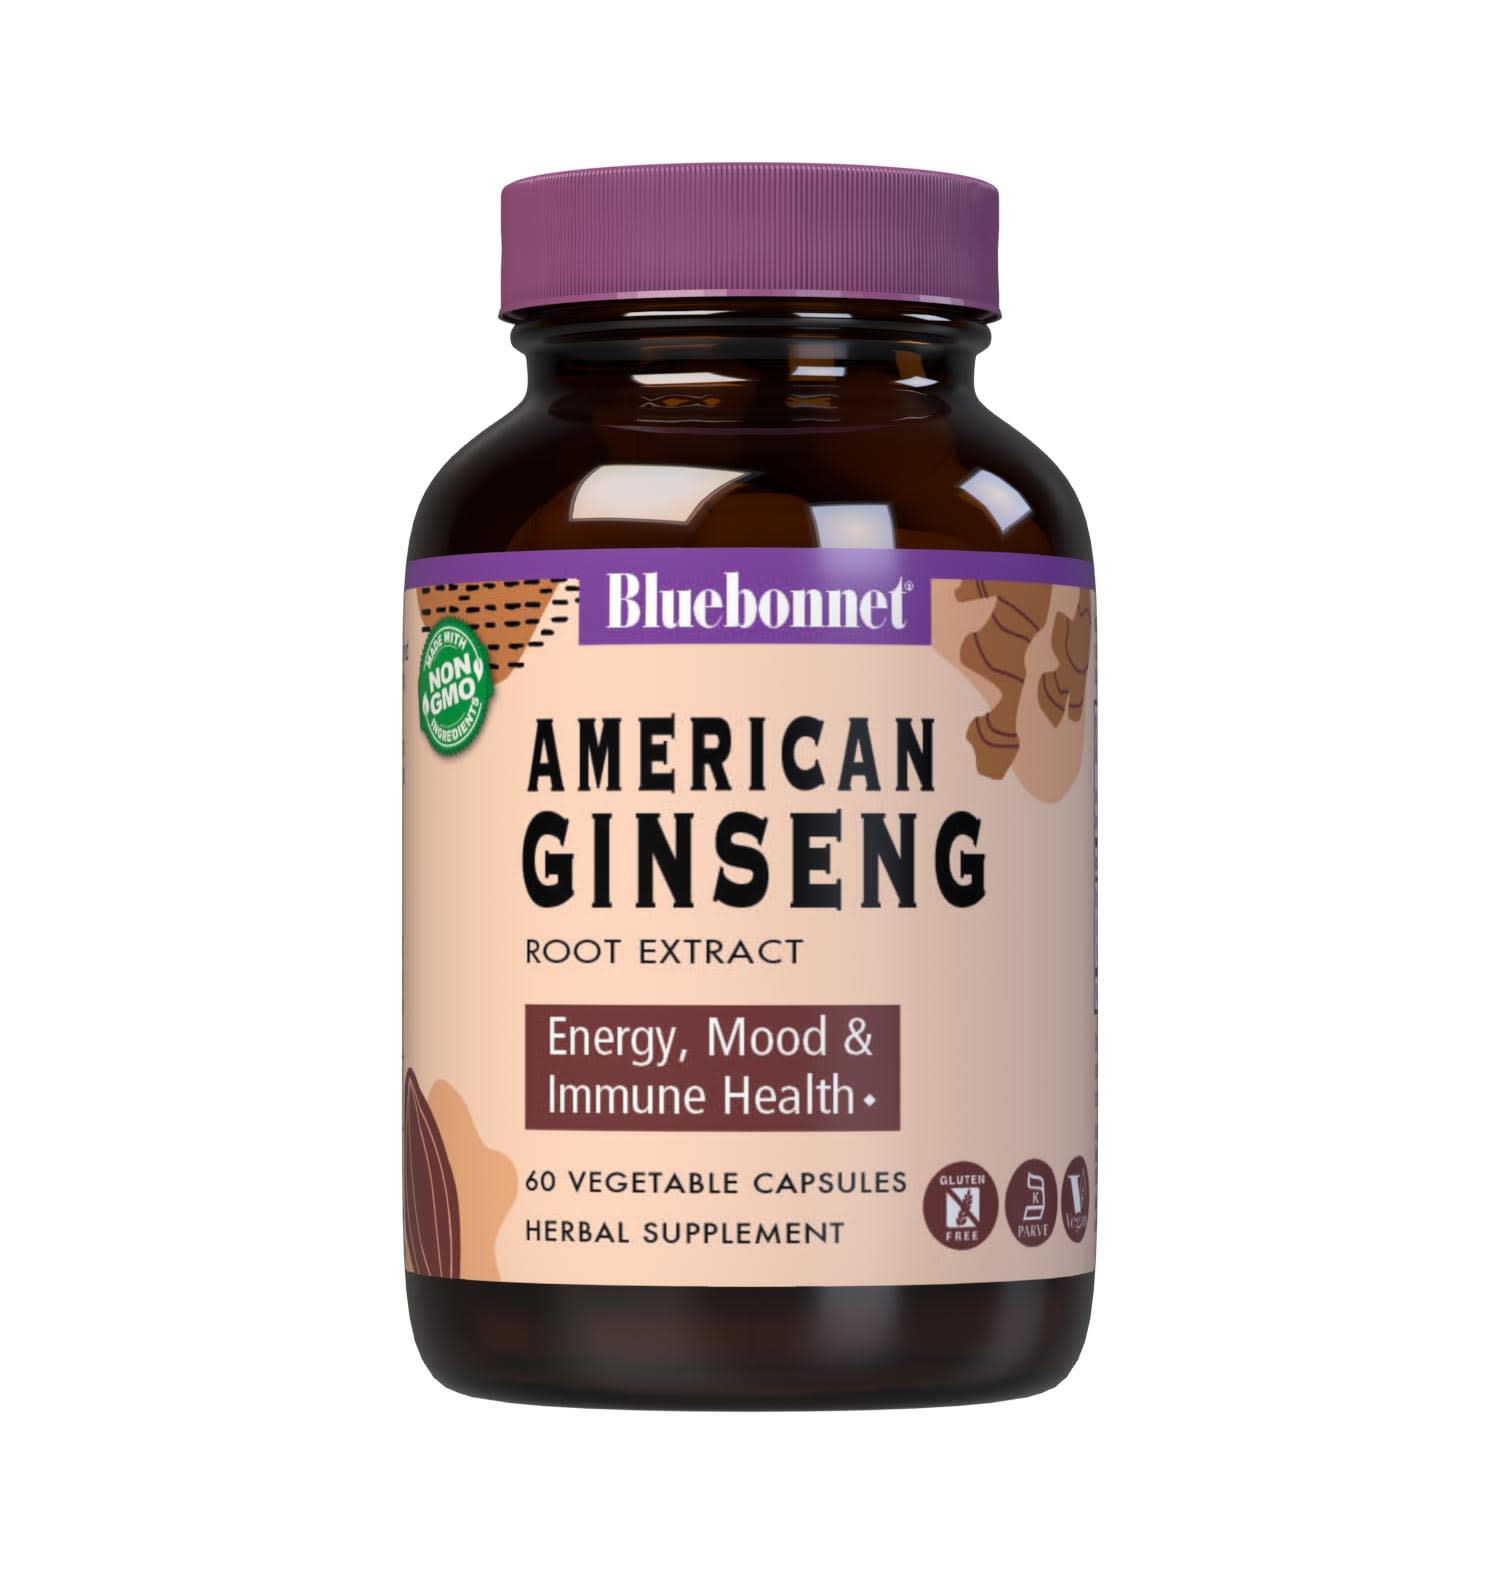 Bluebonnet’s Standardized American Ginseng Root Extract 60 Vegetable Capsules provide a standardized extract of ginsenosides, the most researched active constituents found in American ginseng root. A clean and gentle water-based extraction method is employed to capture and preserve American ginseng’s most valuable components. #size_60 count